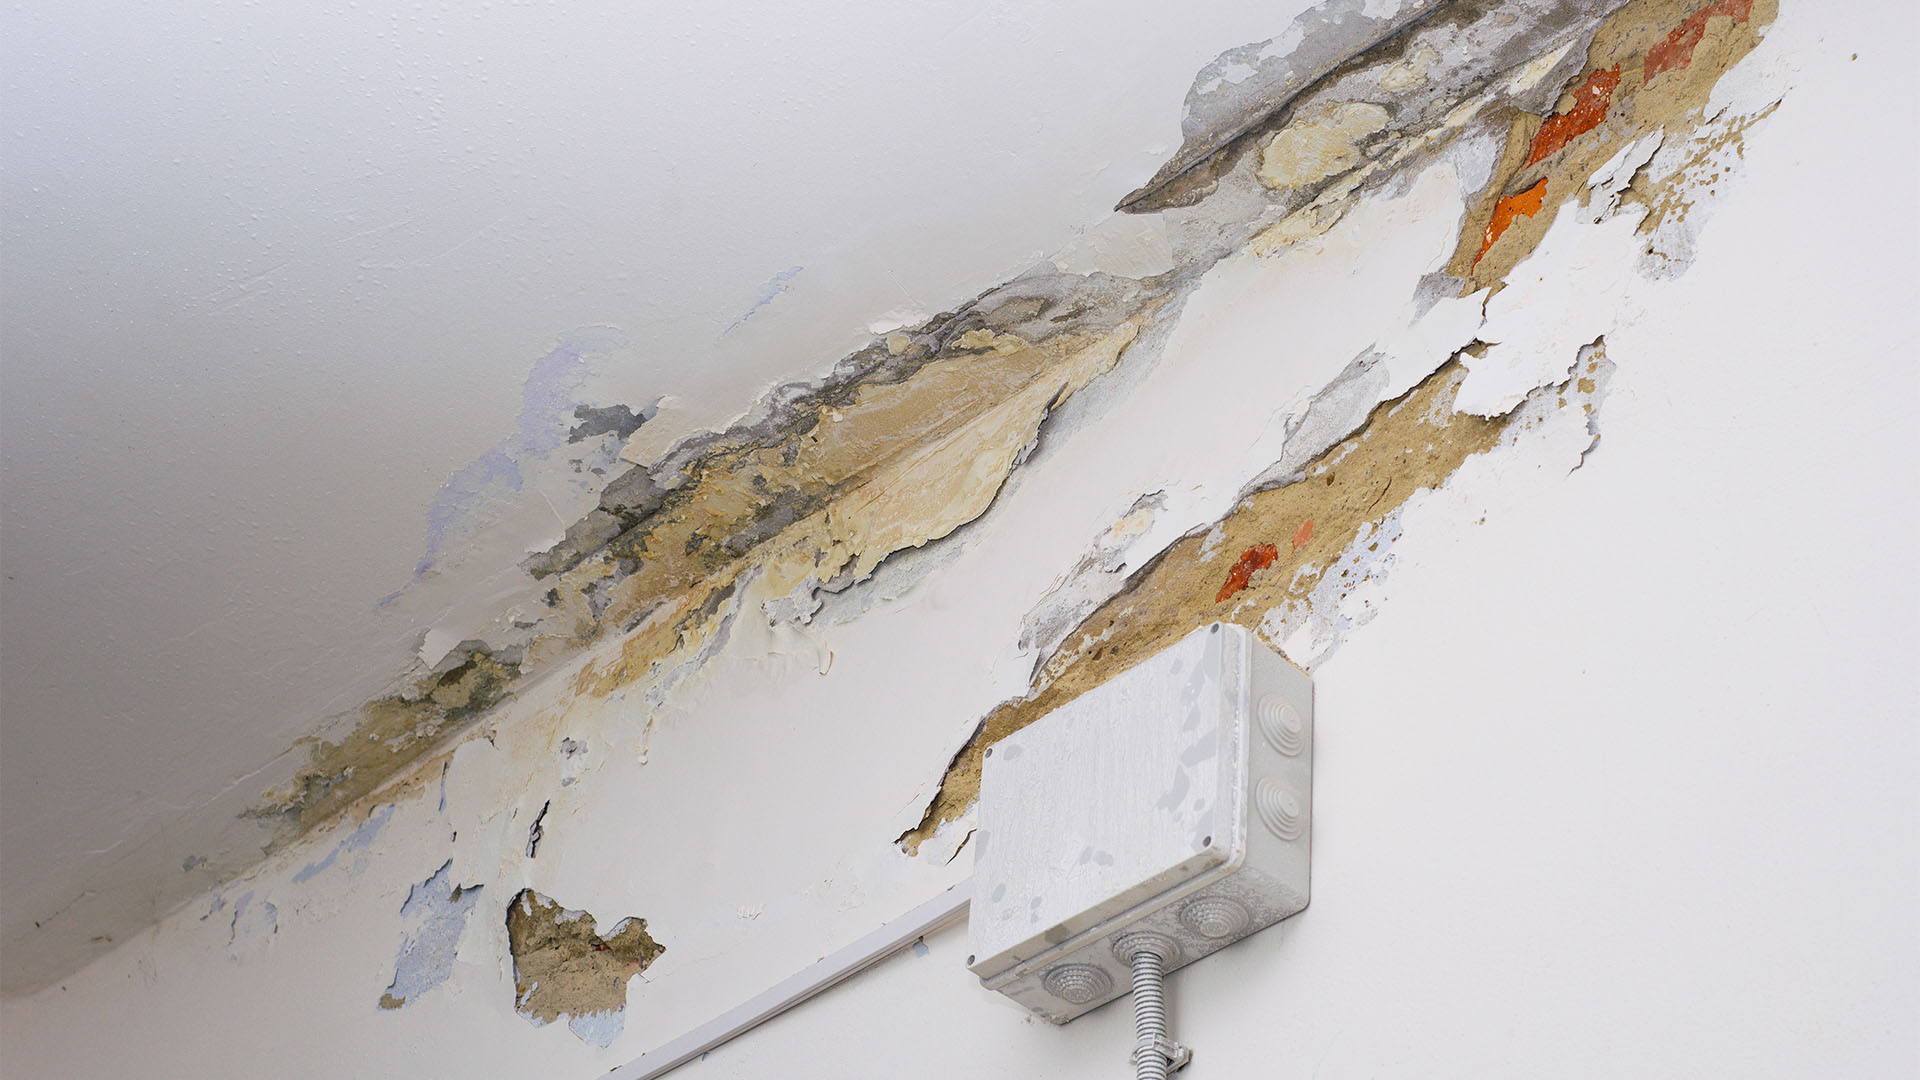 Water leak damage on ceilings and walls